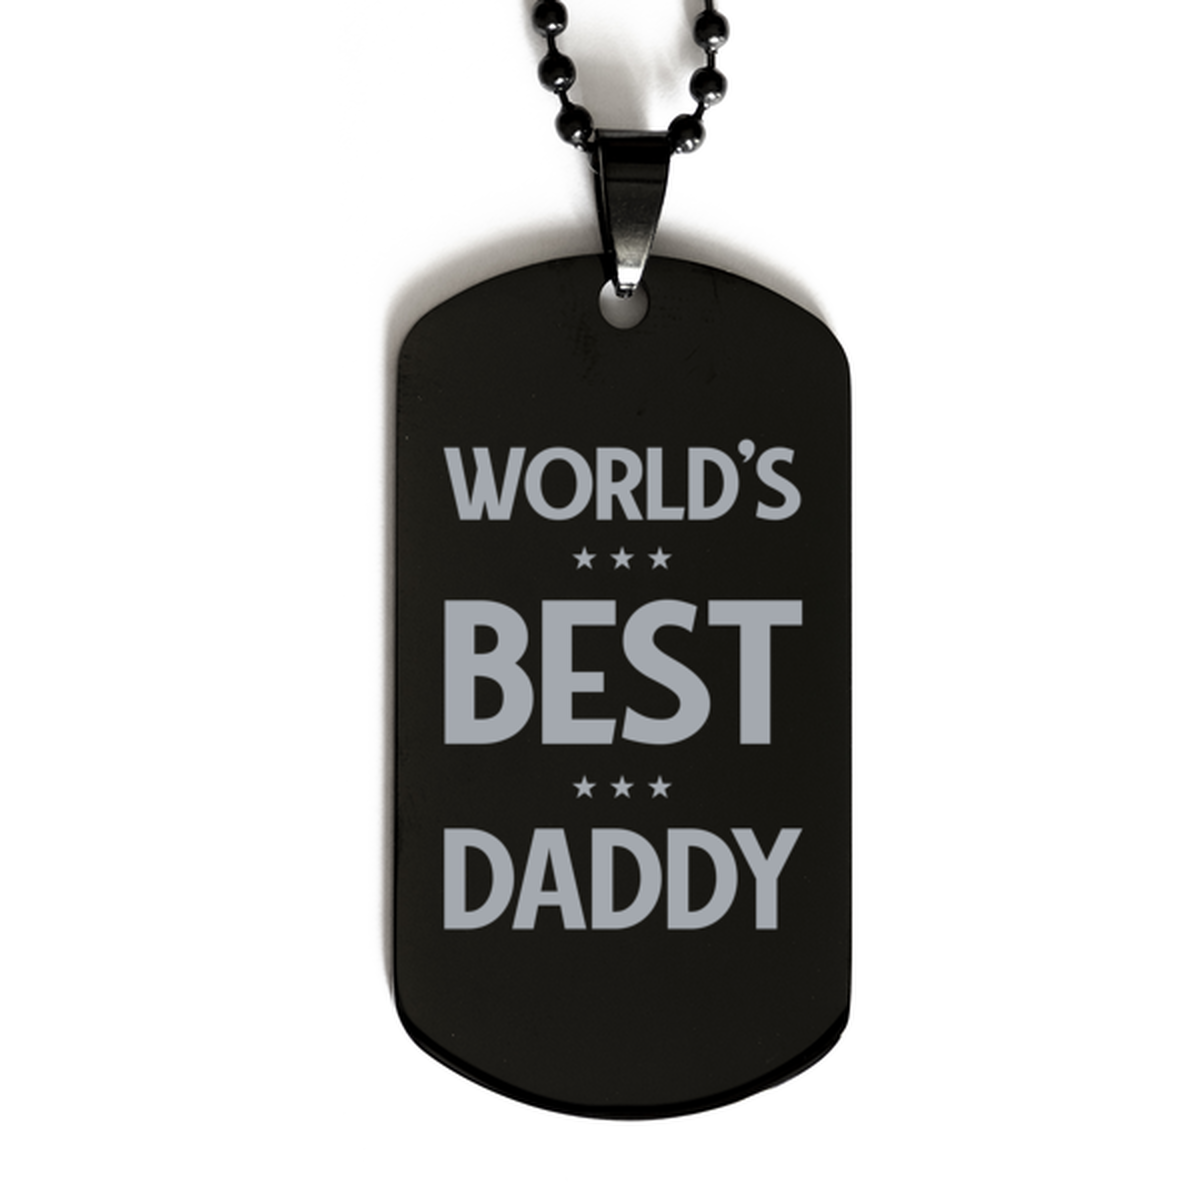 Worlds Best Daddy Gifts, Funny Black Engraved Dog Tag For Daddy, Birthday Presents For Men